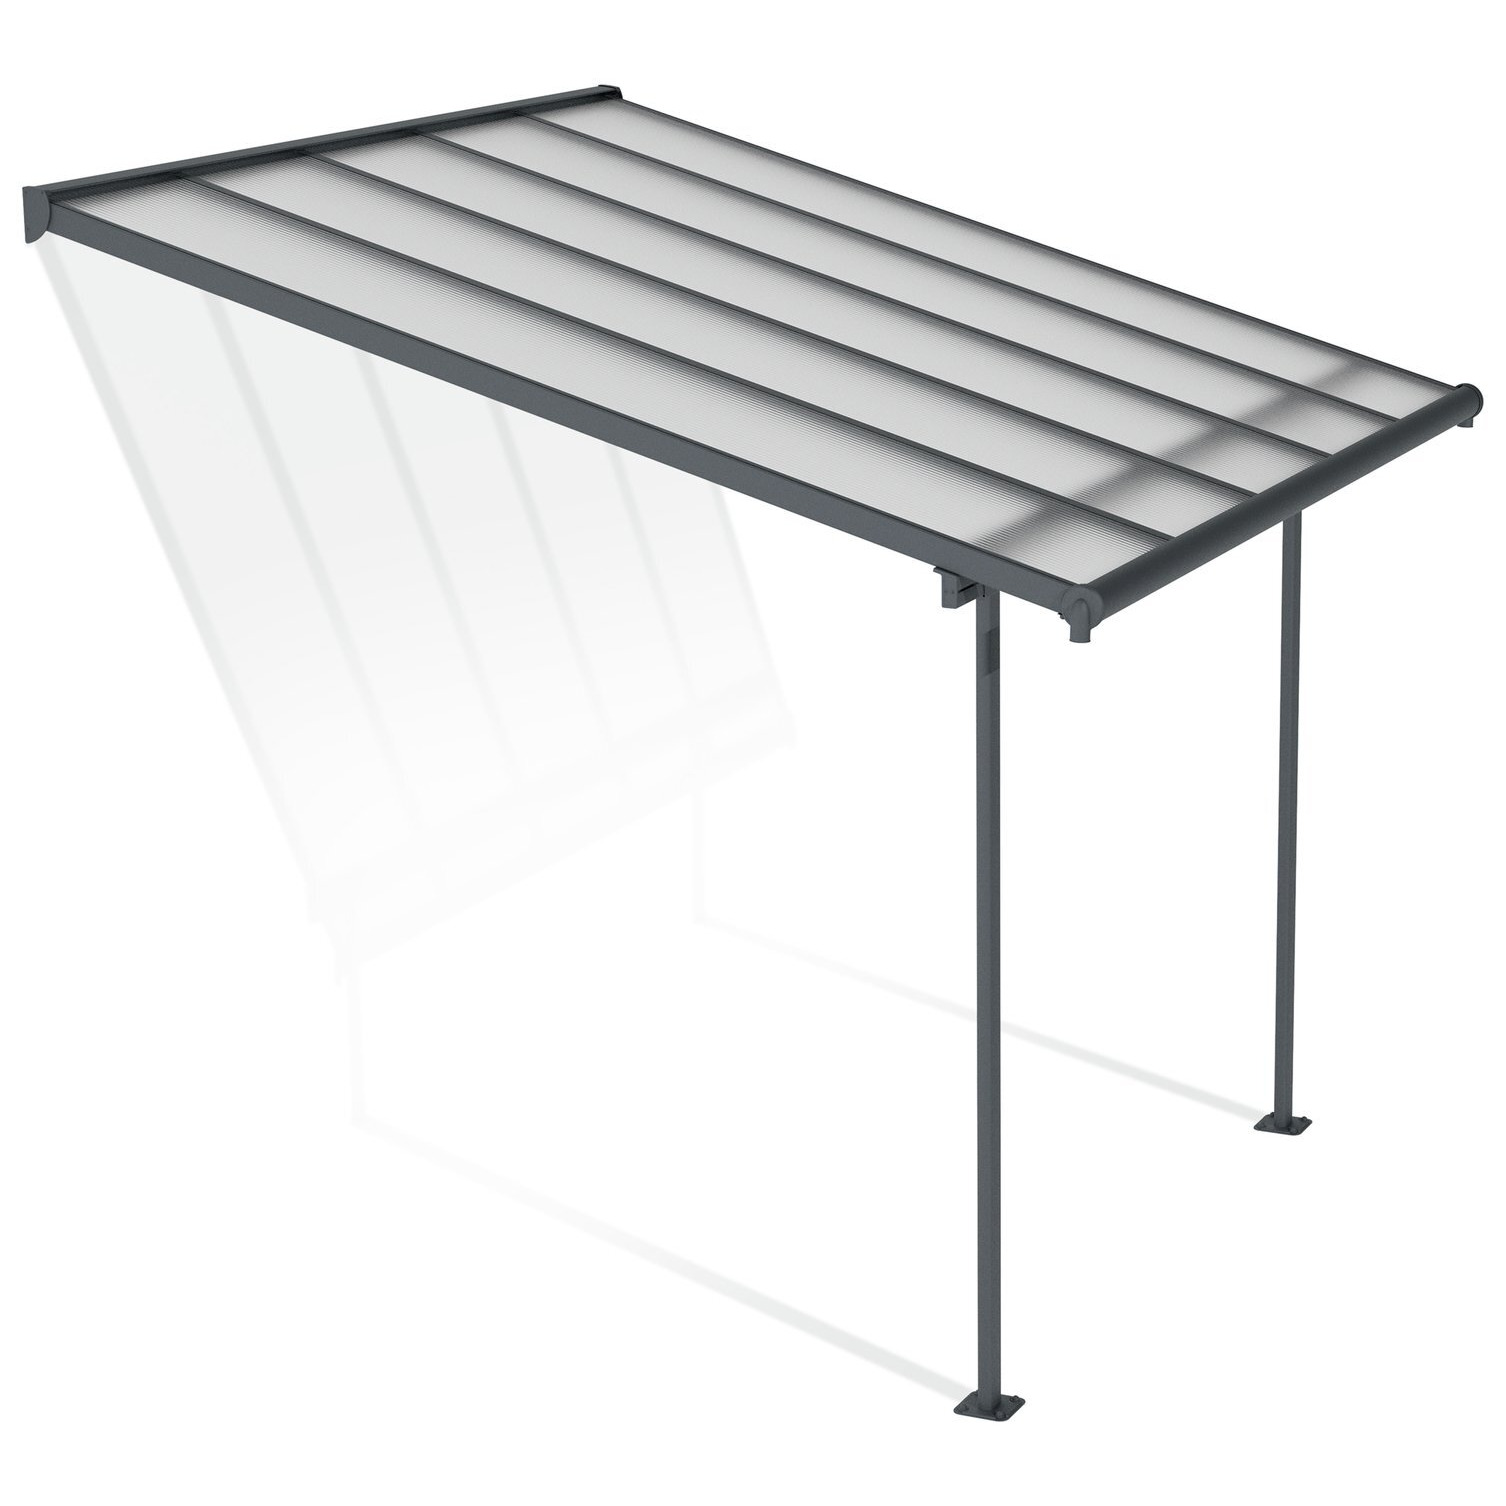 Palram - Canopia Sierra 3 x 3.05m Patio Cover - Grey Clear - image 1